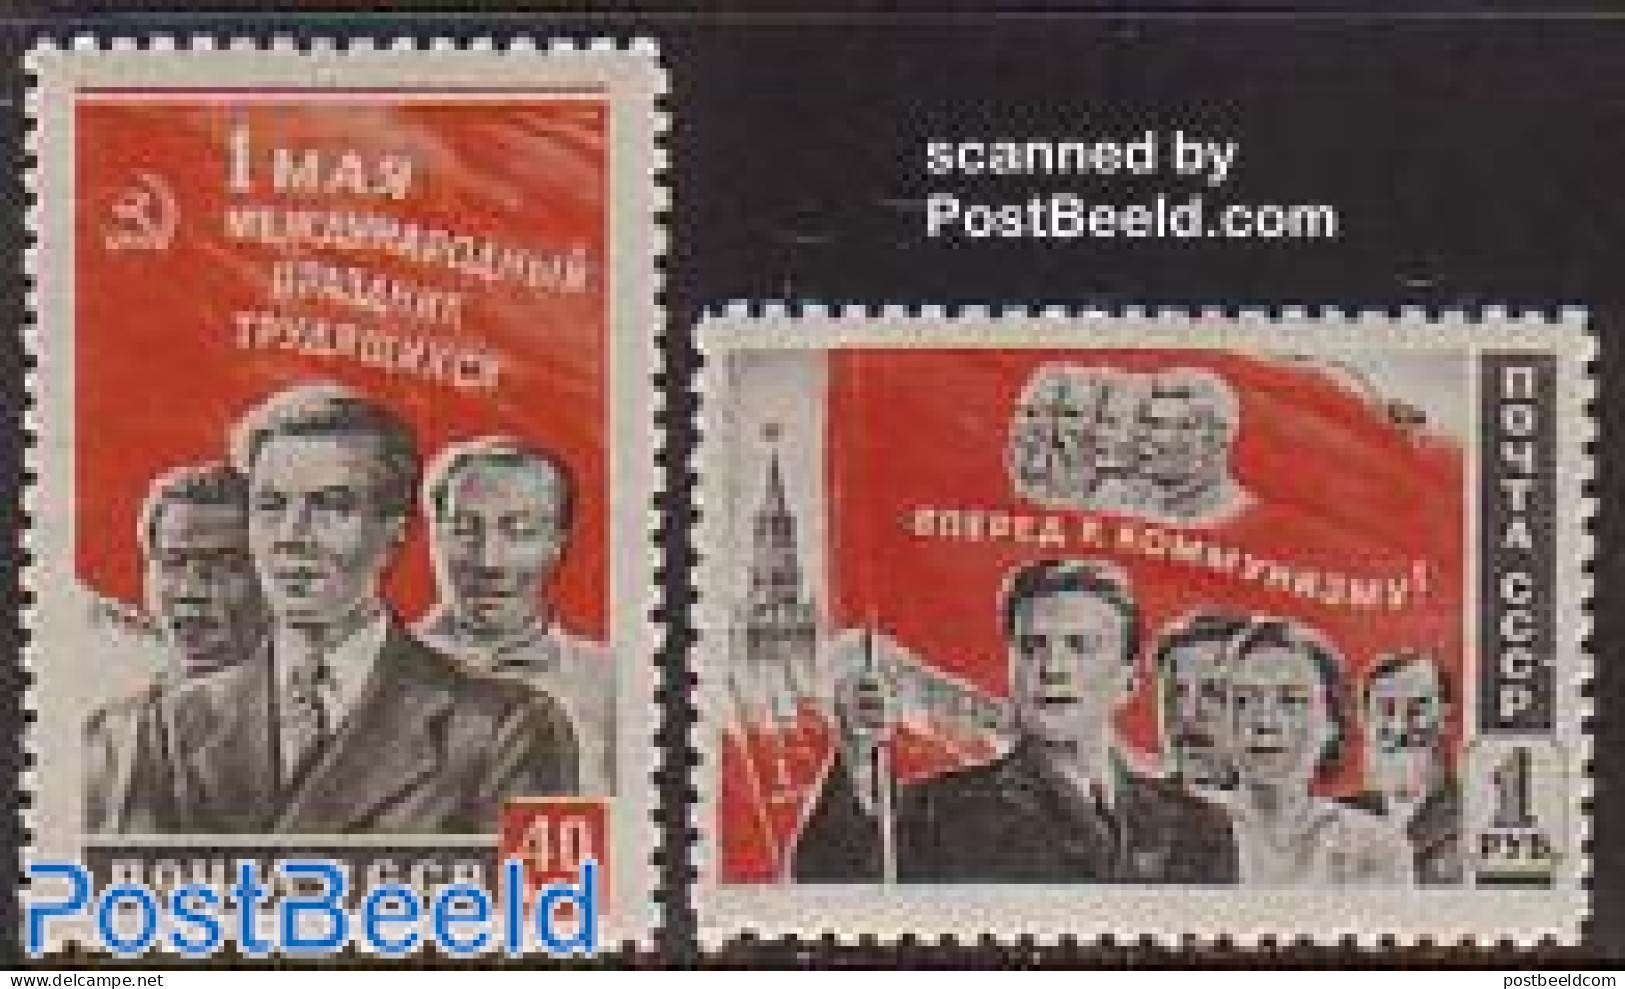 Russia, Soviet Union 1950 60 Years Labour Day 2v, Mint NH, Various - Union - Nuevos